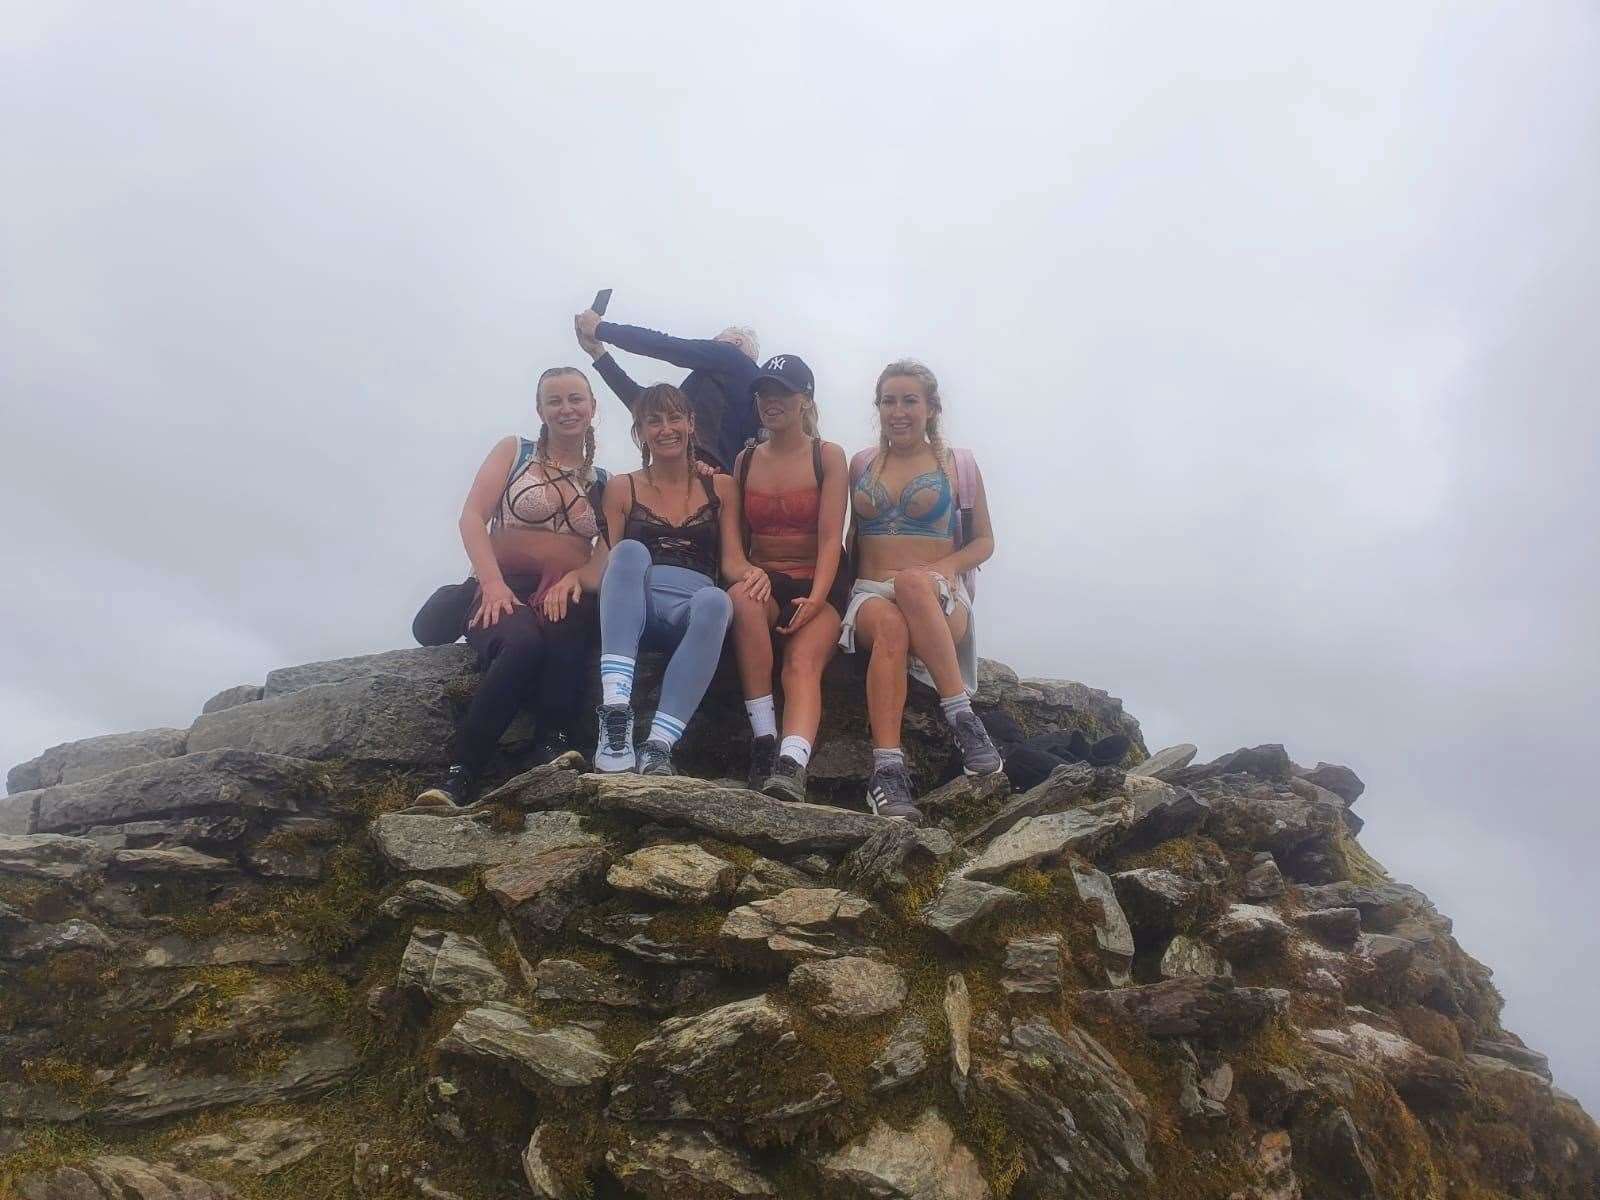 Lorna Turner, Maria Cairns, Cassie Davey and Abi Gentle-Spens at the summit of Snowdon